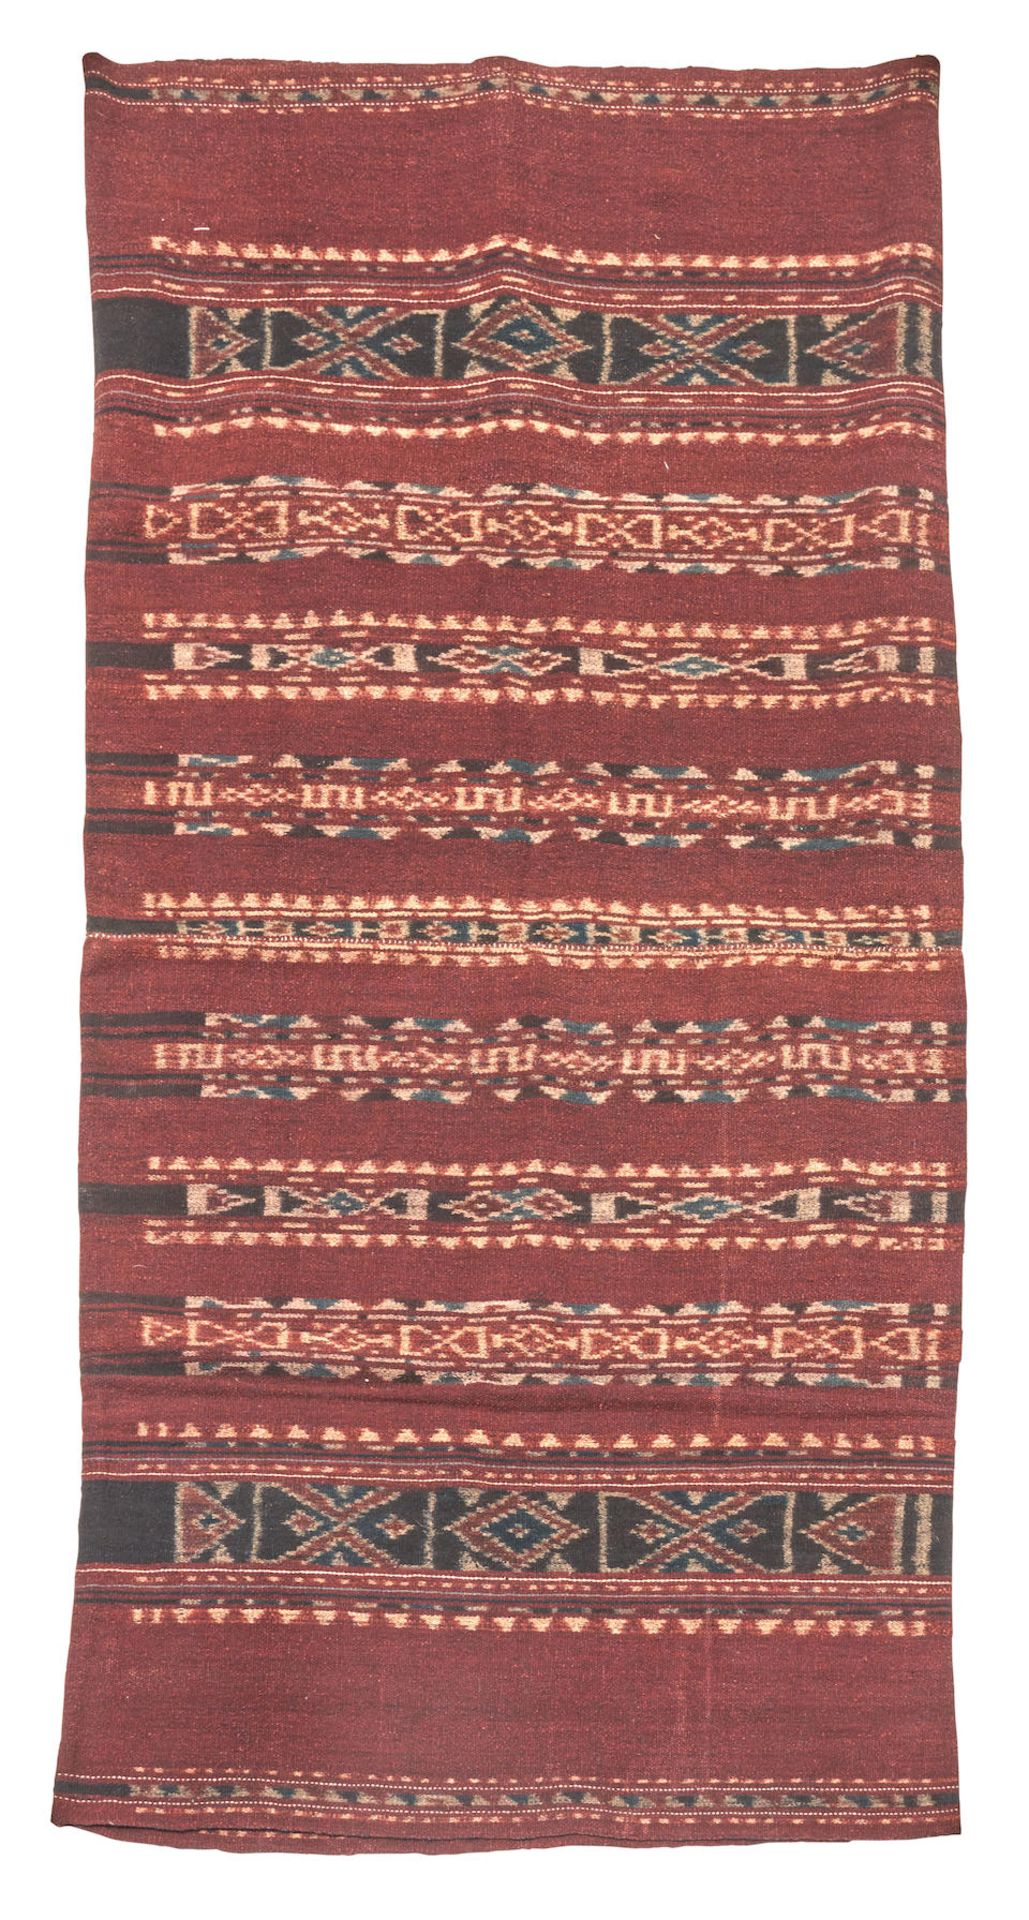 Woman's Patterned Sarong East Flores, Indonesia 23 1/2 in. x 48 in.